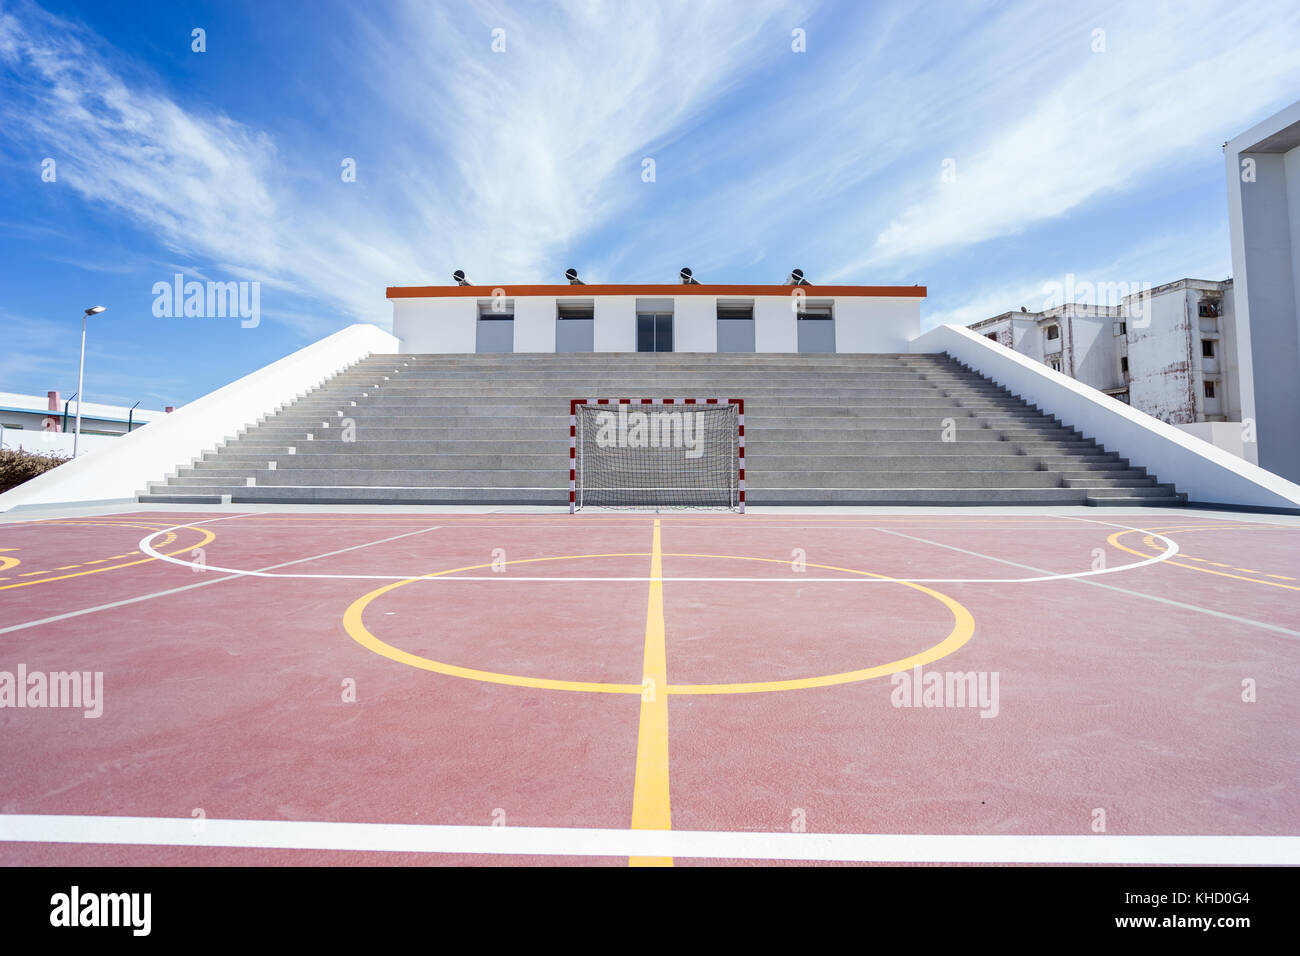 Handball, basketball and soccer field in front of stairs Stock Photo